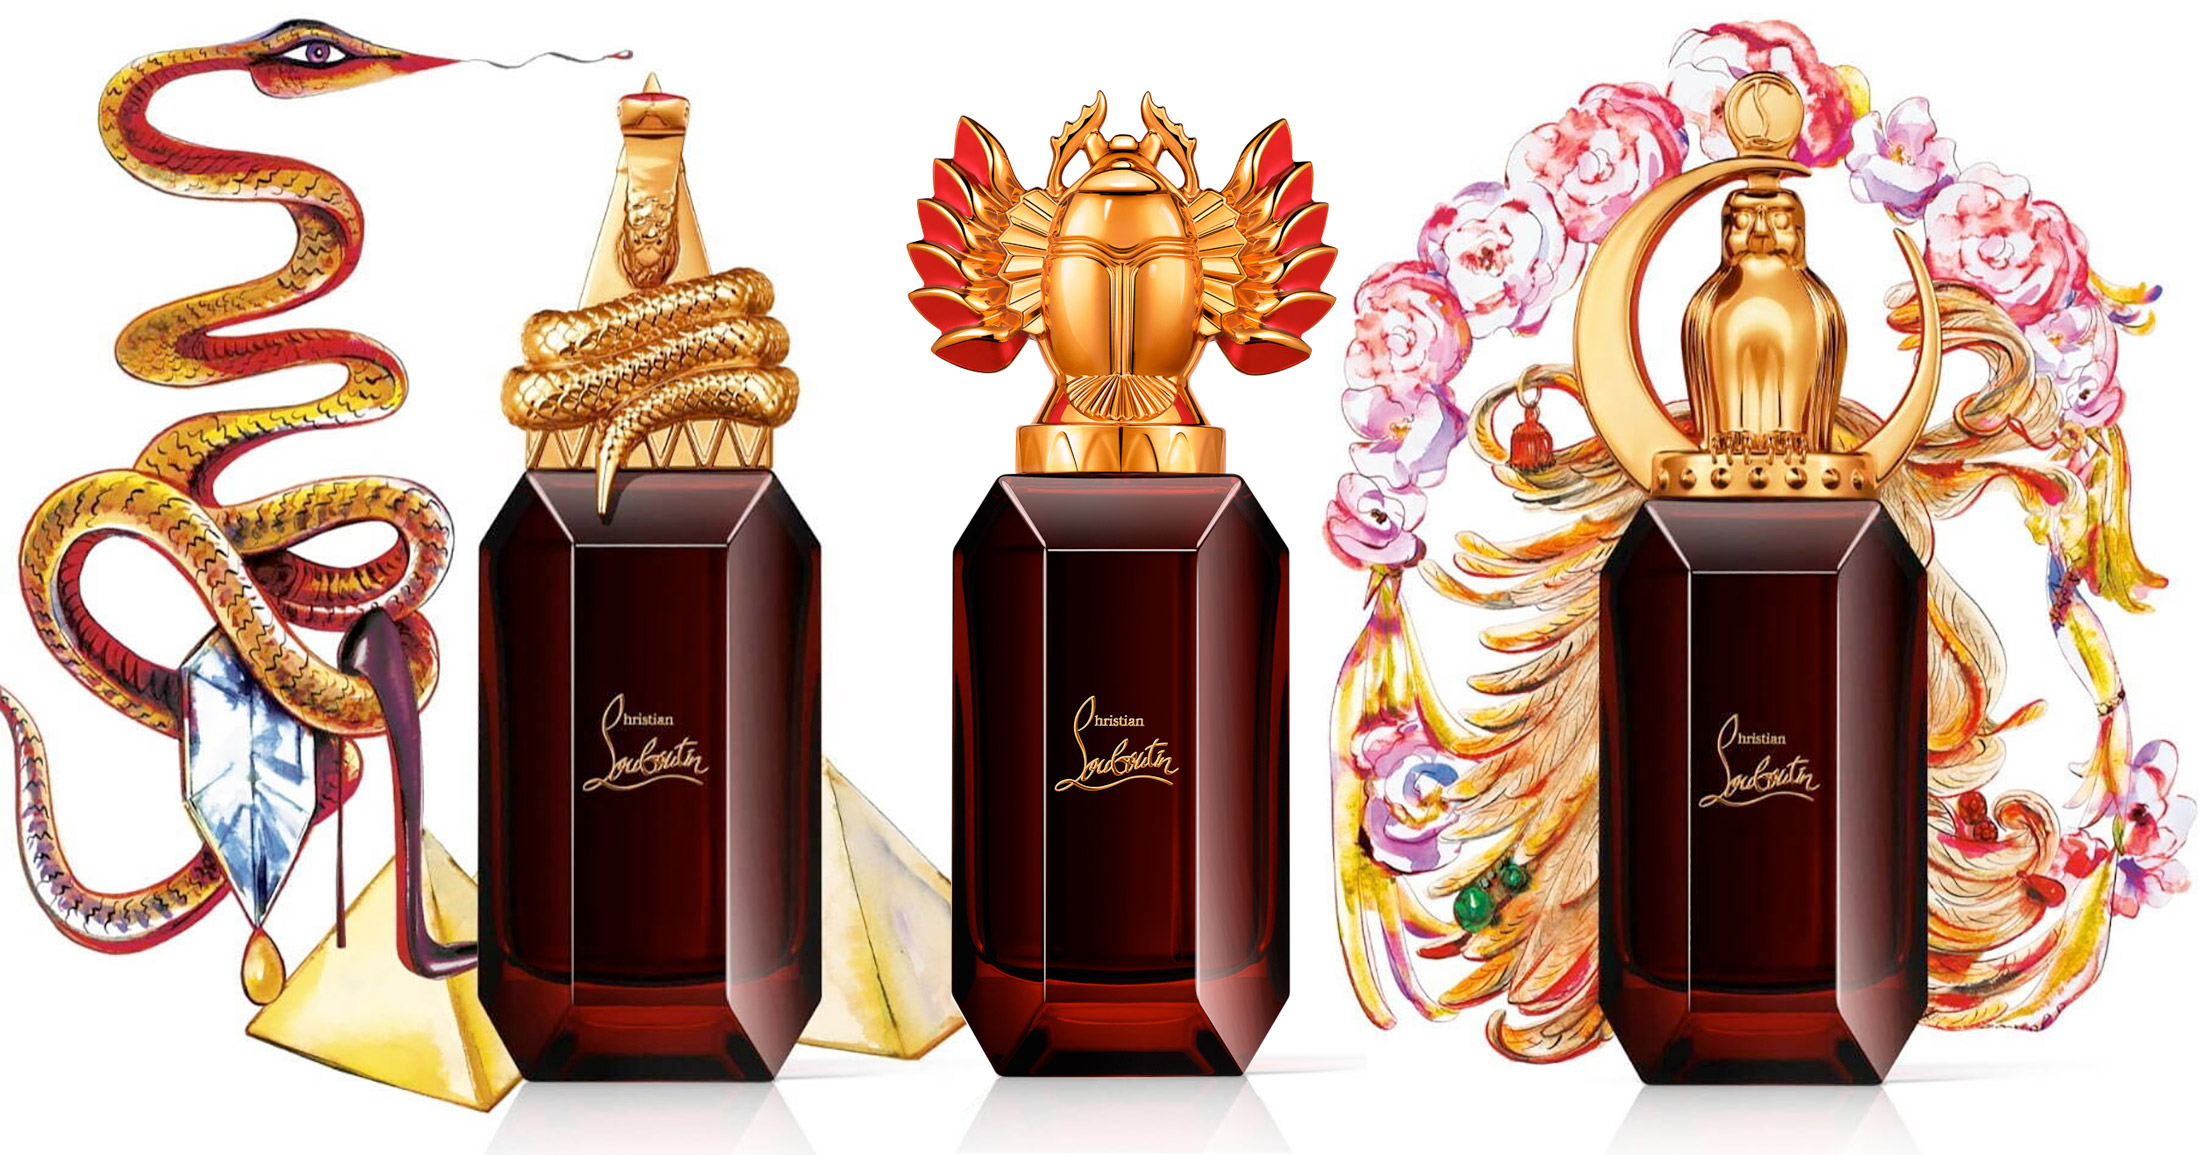 Christian Louboutin will launch his first-ever collection of fragrances